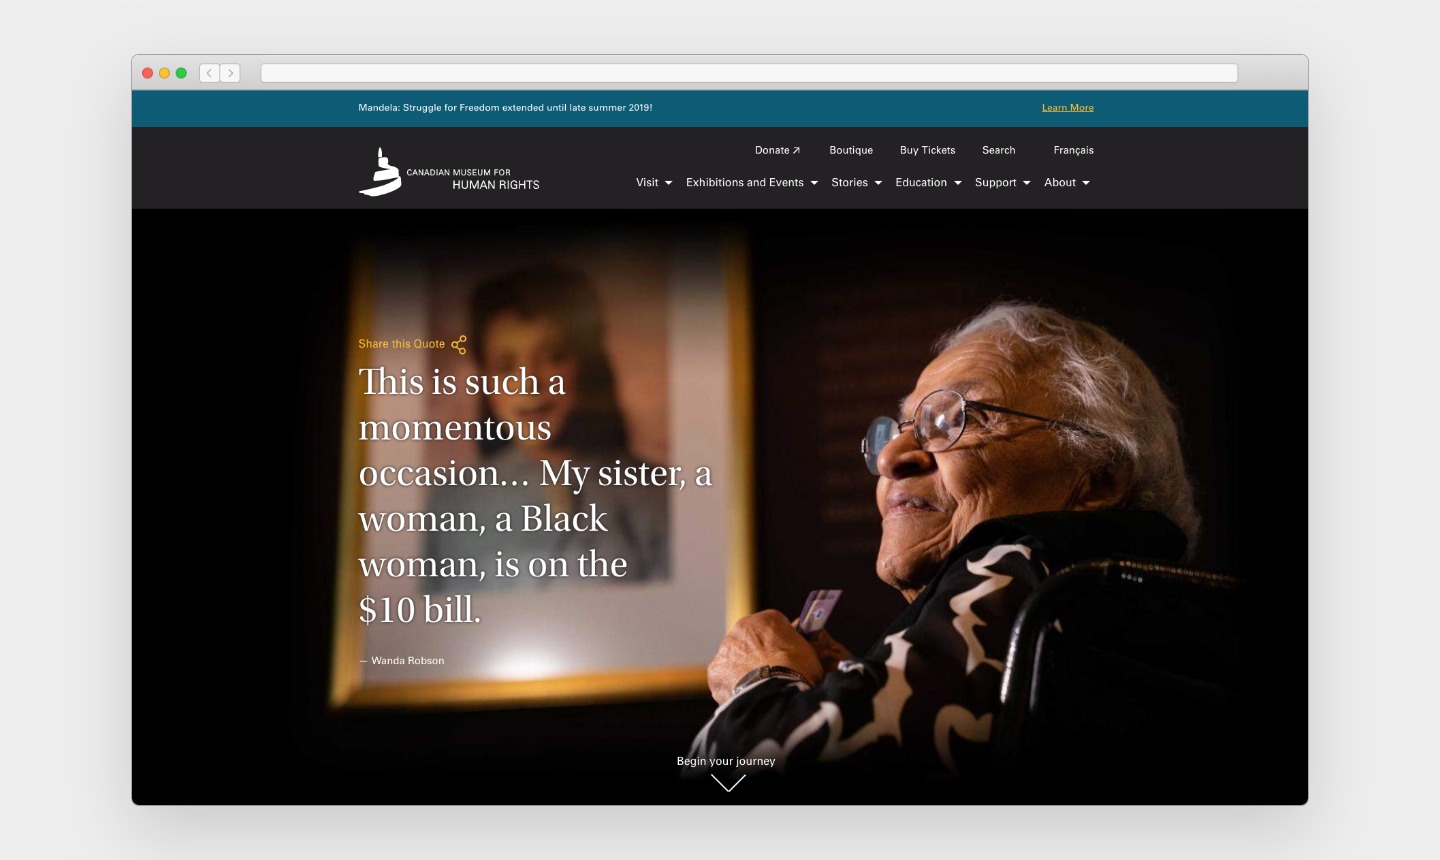 Screenshot of a webpage with a teal blue bar on top announcing "Mandela: Struggle for Freedom extended until late summer 2019." Below that are two rows of navigational items. The majority of the image is a photo of an older woman looking off towards the left and large text that reads, "This is such a momentous occasion . . . My sister, a woman, a Black woman, is on the $10 bill."